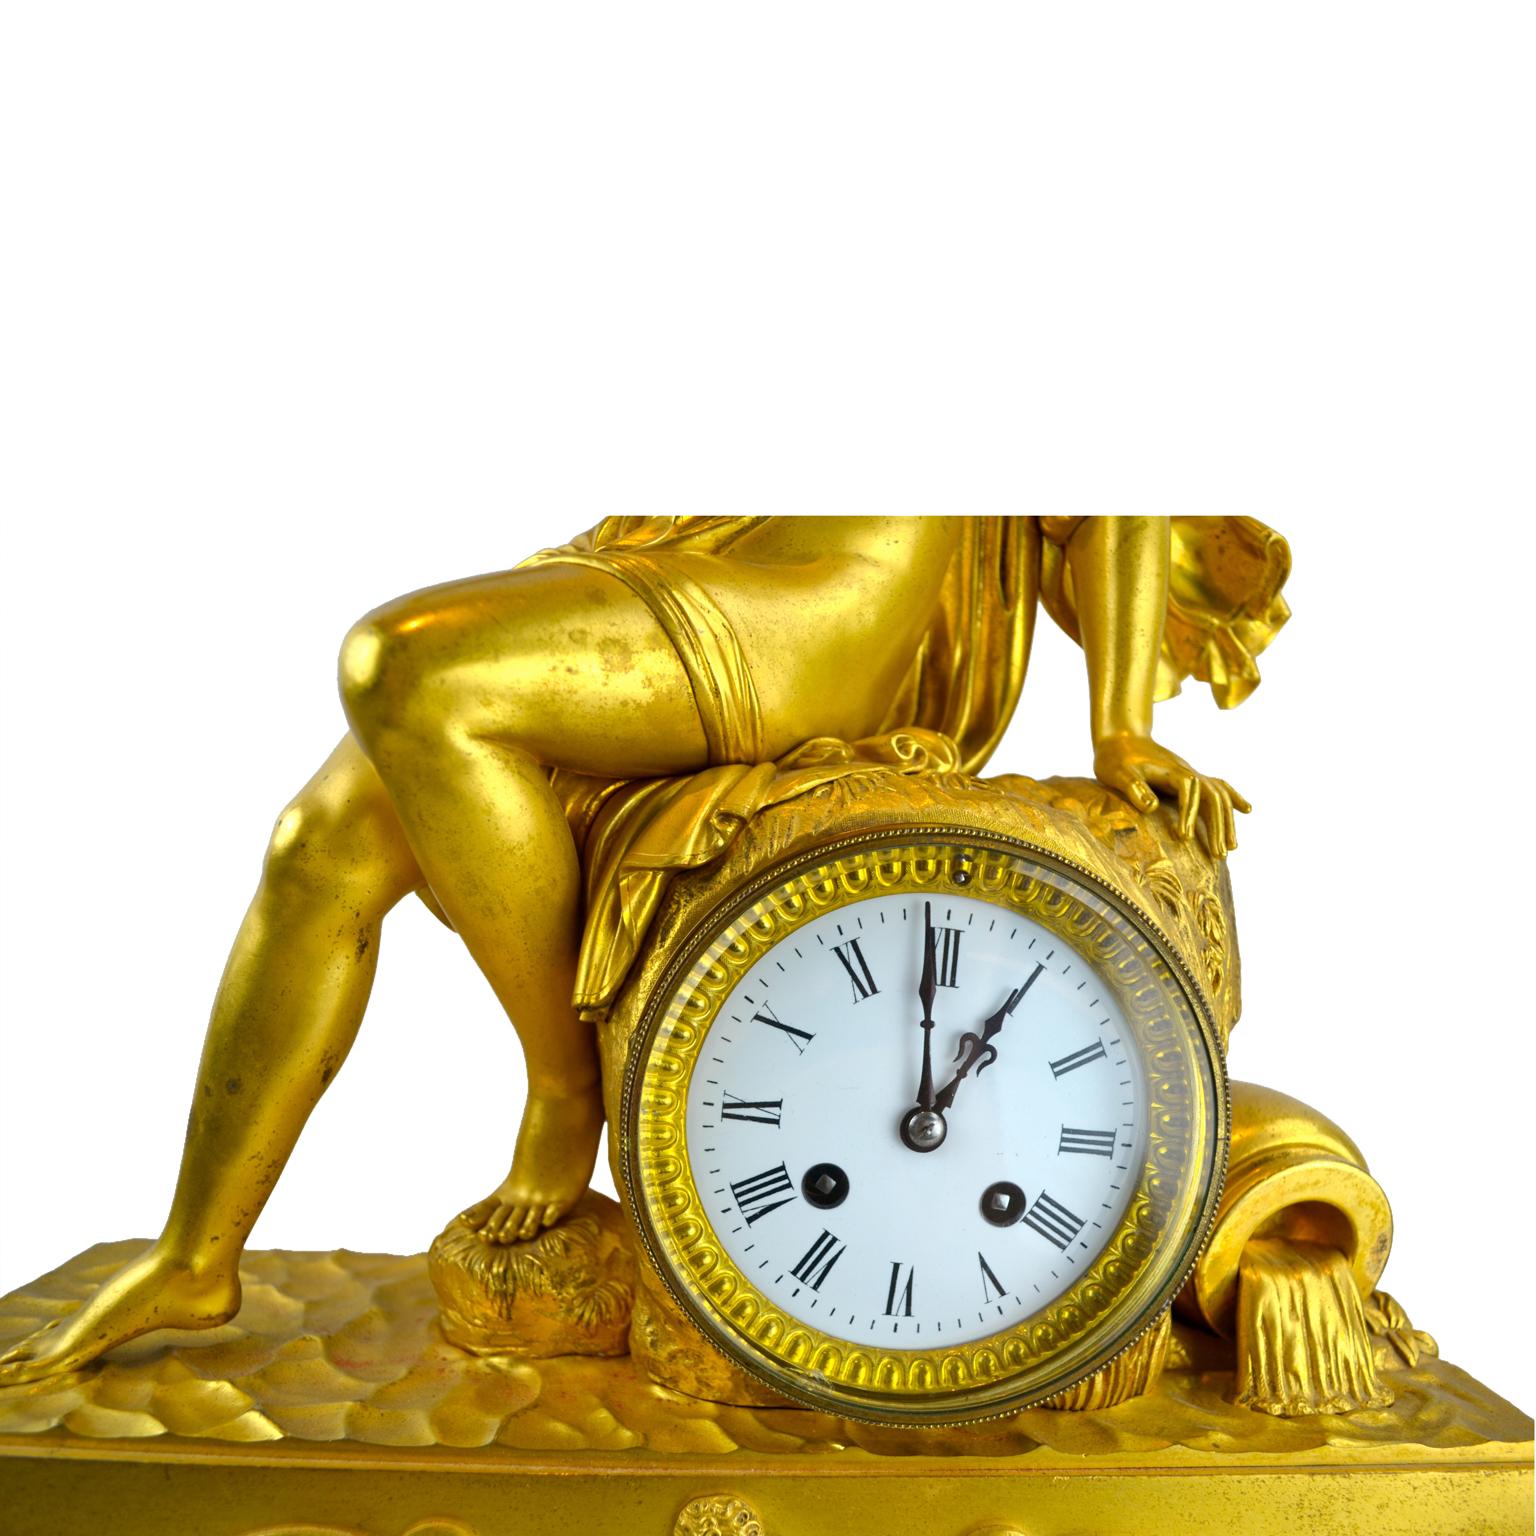 A gilt bronze French Empire clock depicting an allegory to the earth’s water source. In this clock a classically draped nymph sits atop a rocky outcrop her right foot resting on the water. To the right of the rocky clock plinth is a large jar with